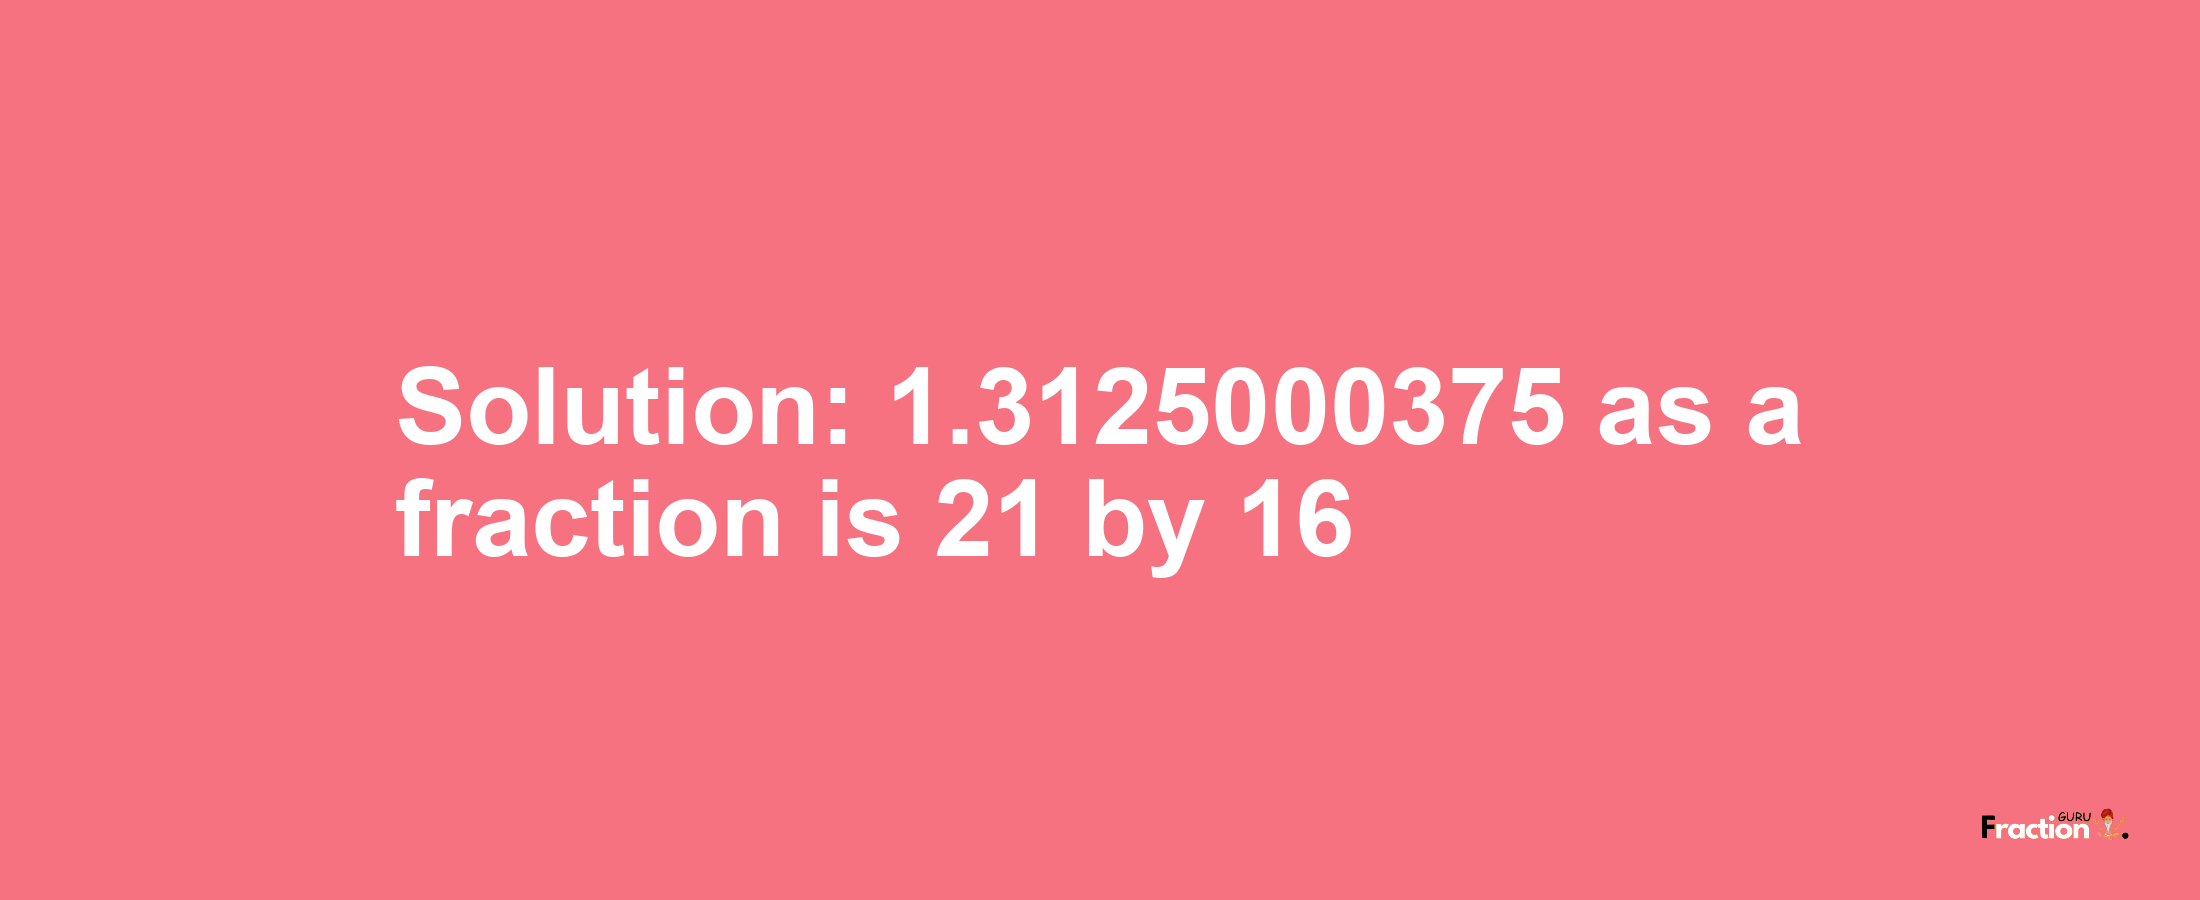 Solution:1.3125000375 as a fraction is 21/16